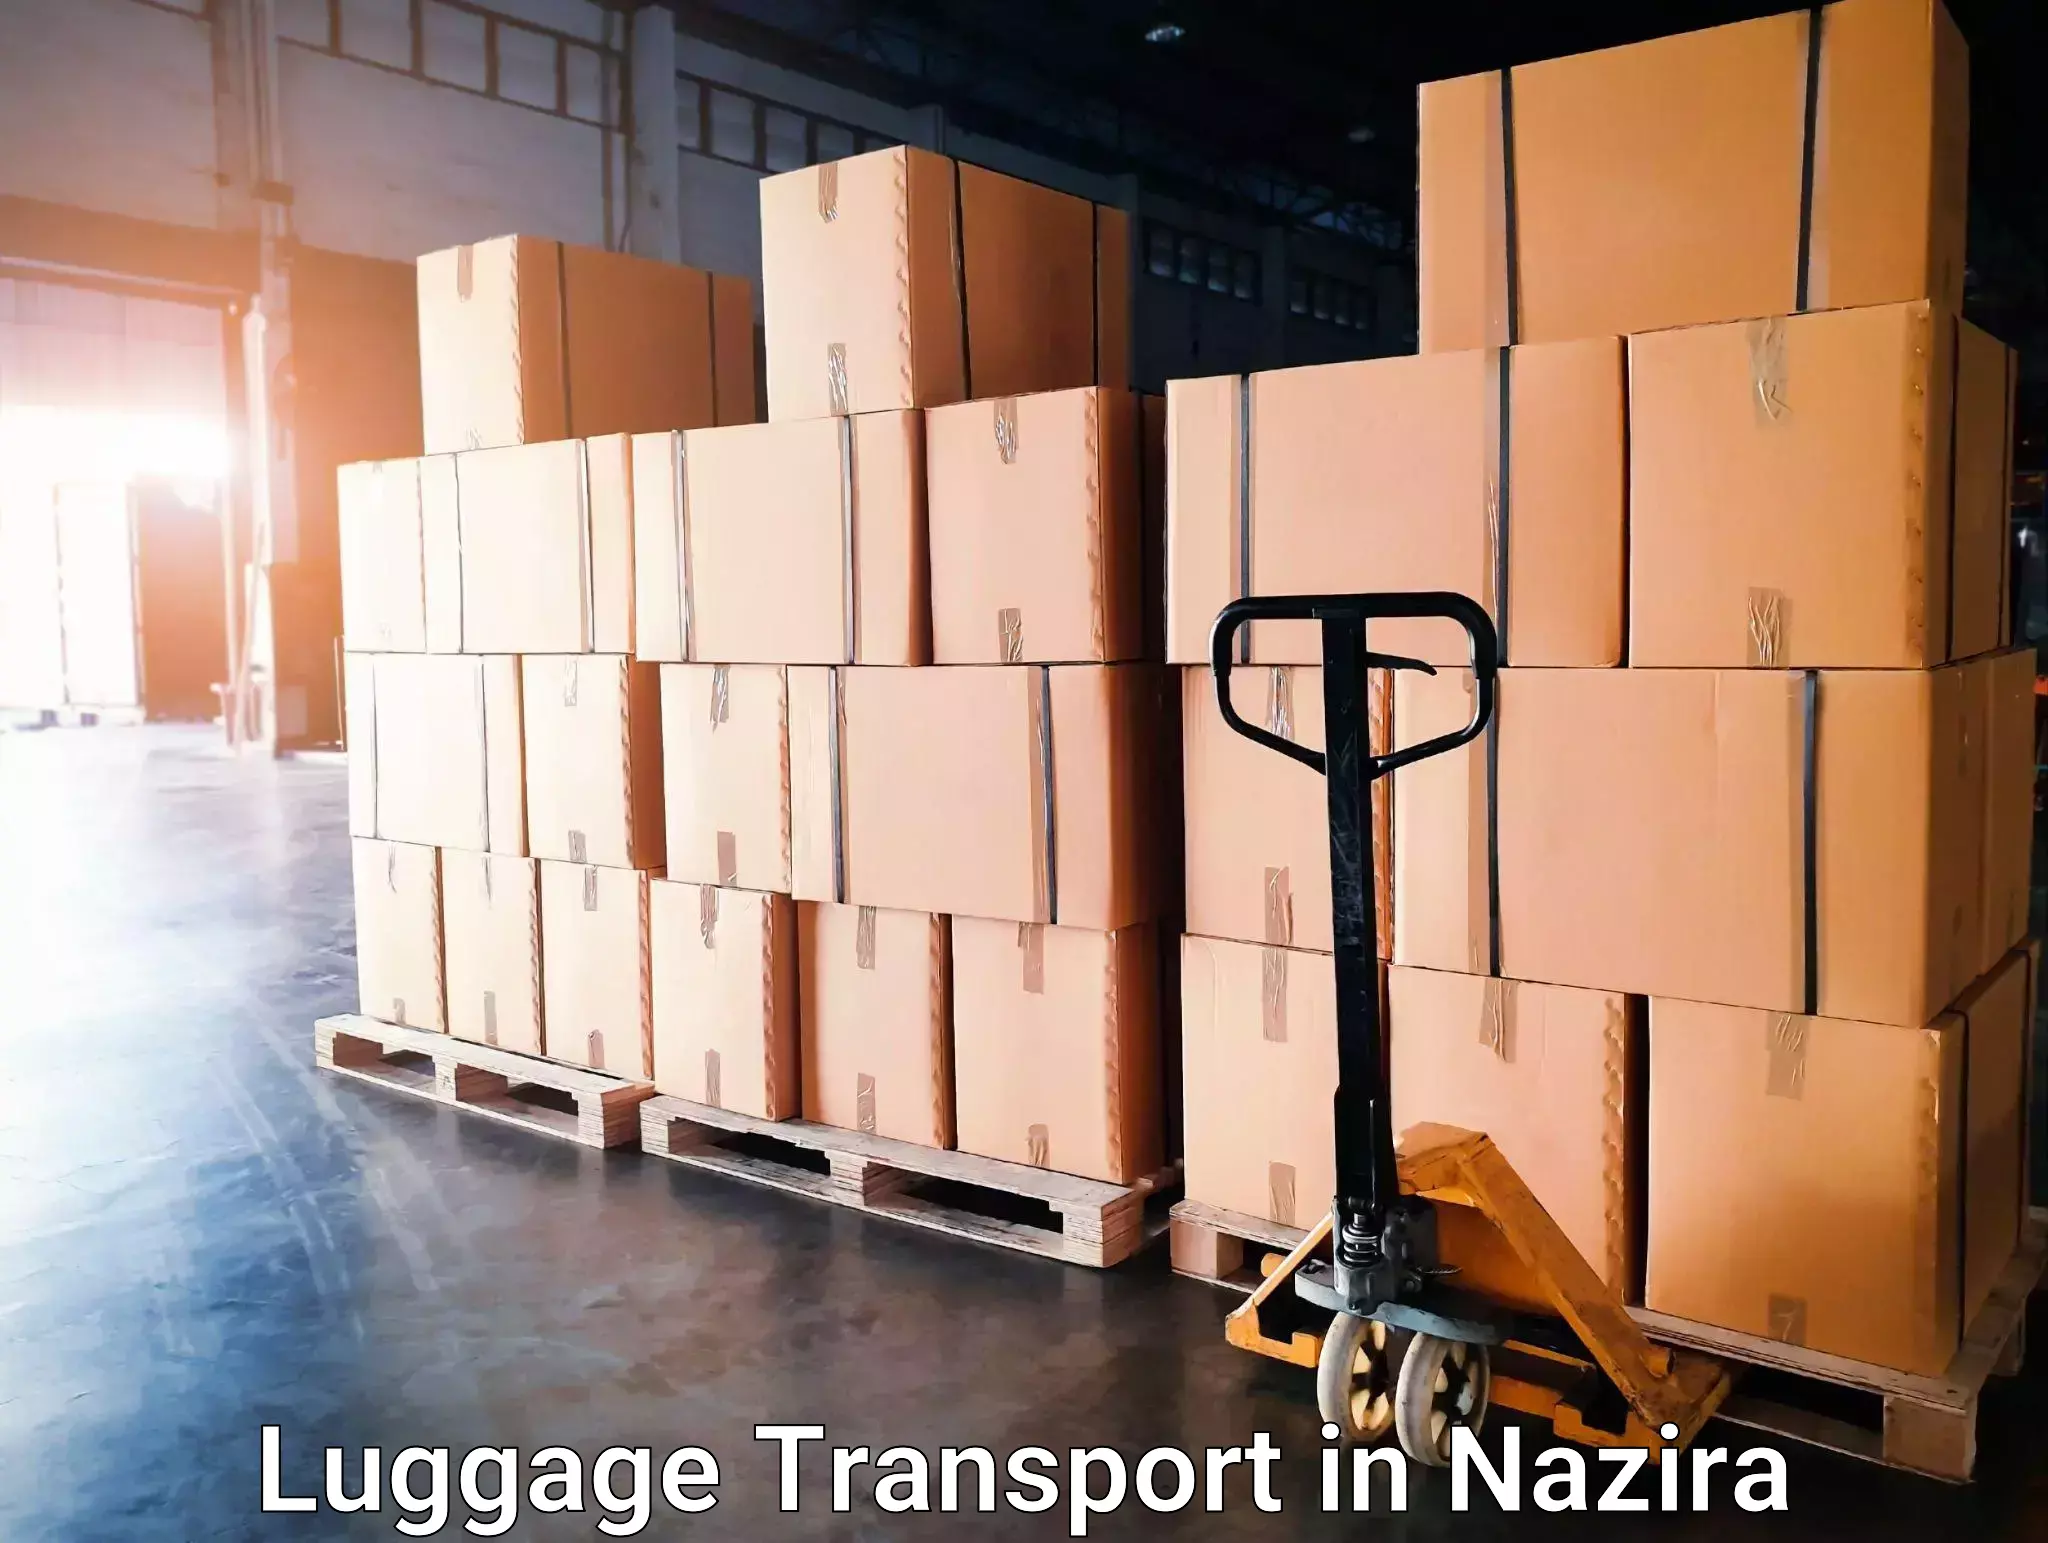 Timely baggage transport in Nazira